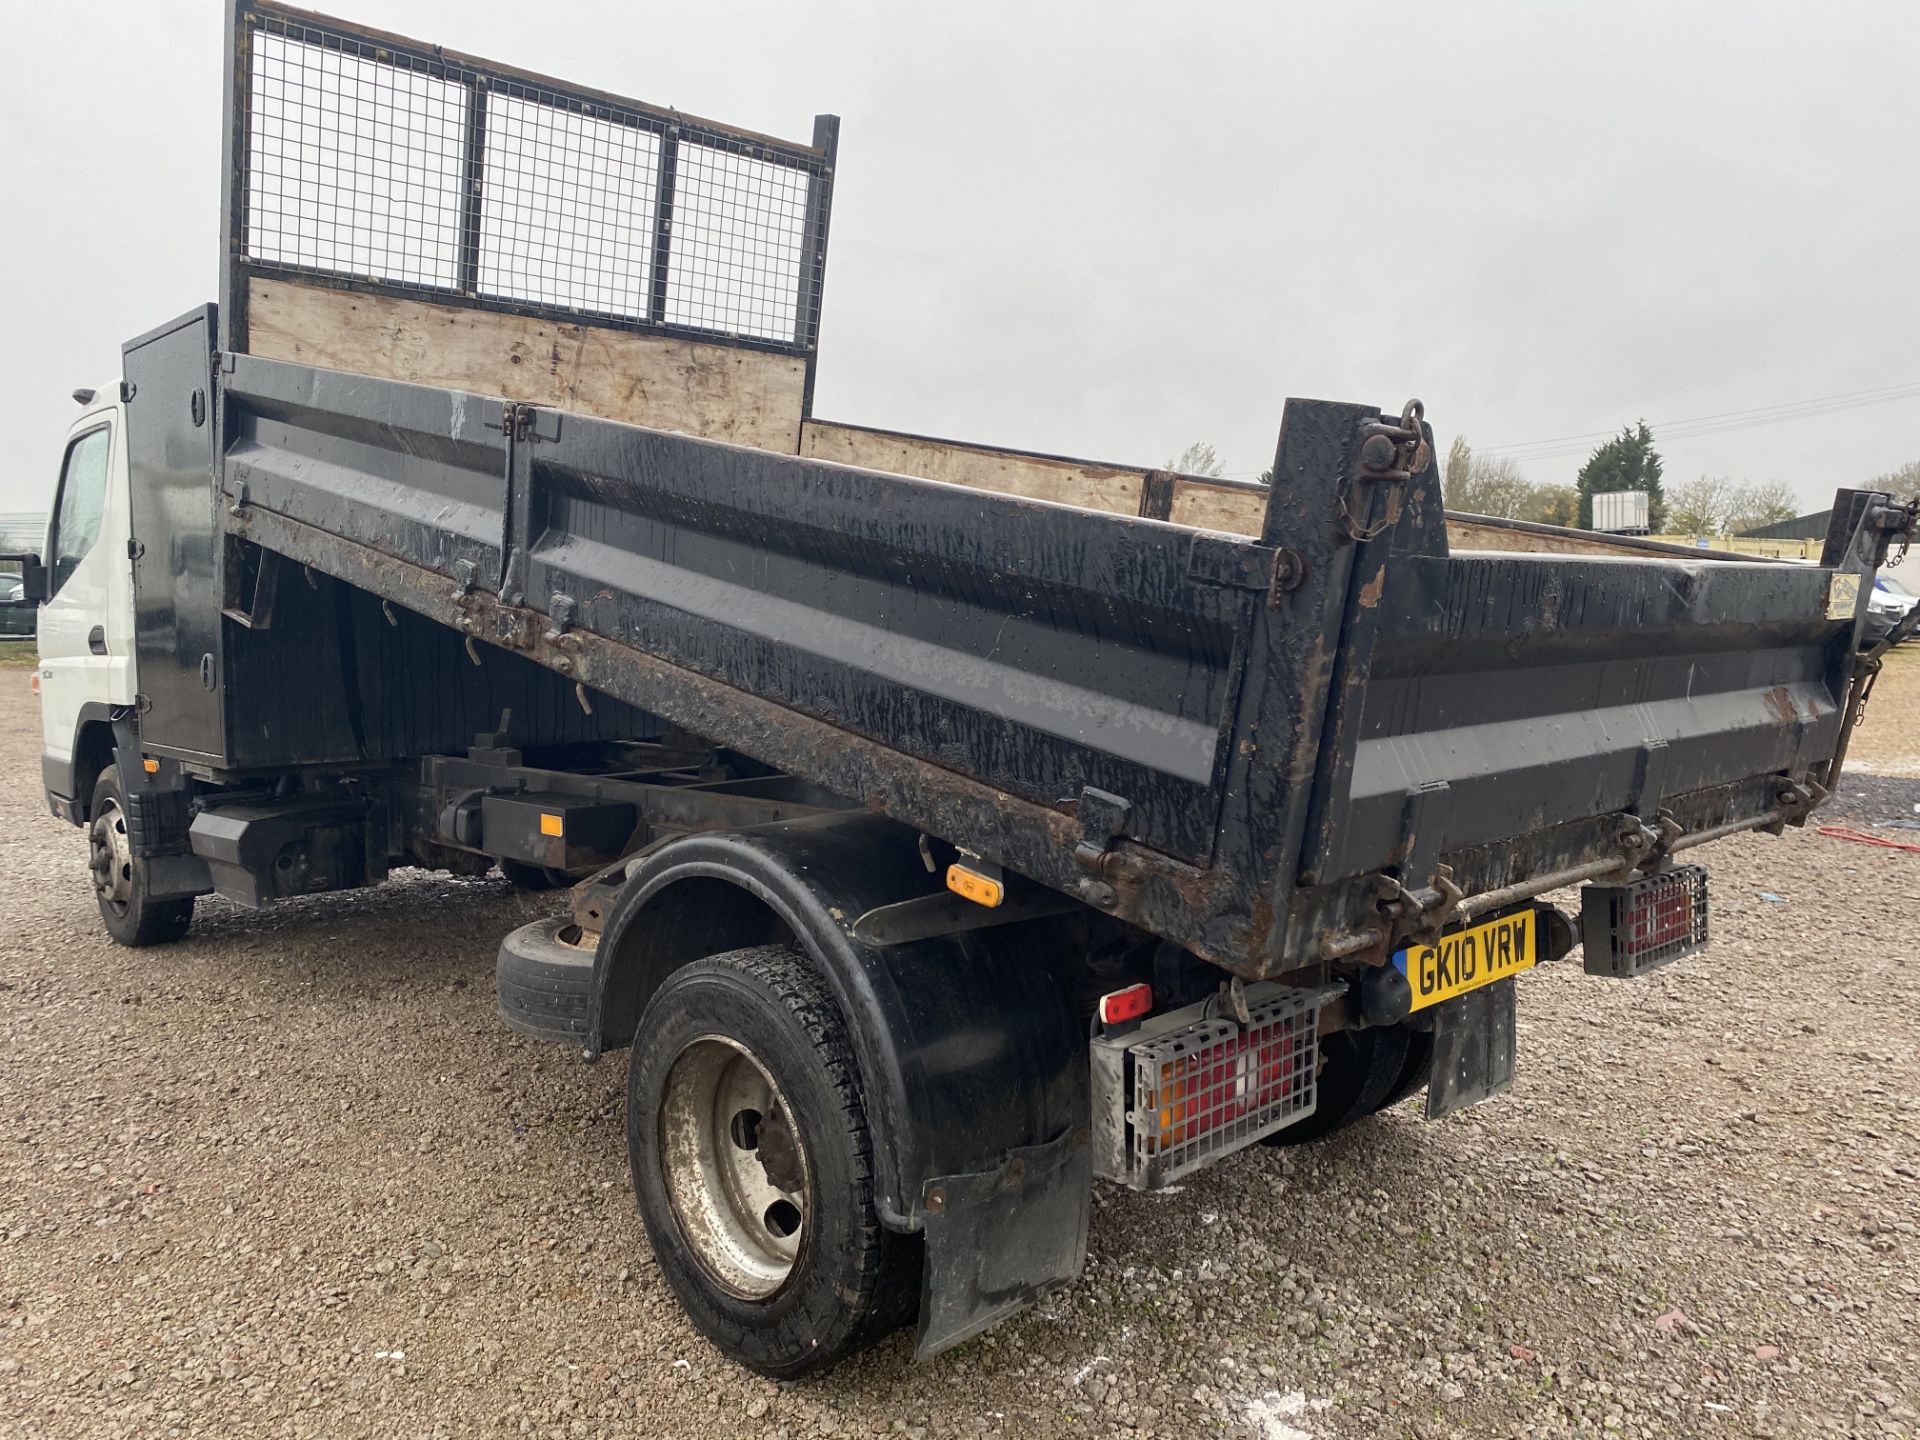 (ON SALE) MITSUBISHI CANTER 7C18 TIPPER TRUCK - 10 REG - 7500KG TIPPER - MANUAL GEARBOX - LOW MILES - Image 6 of 15